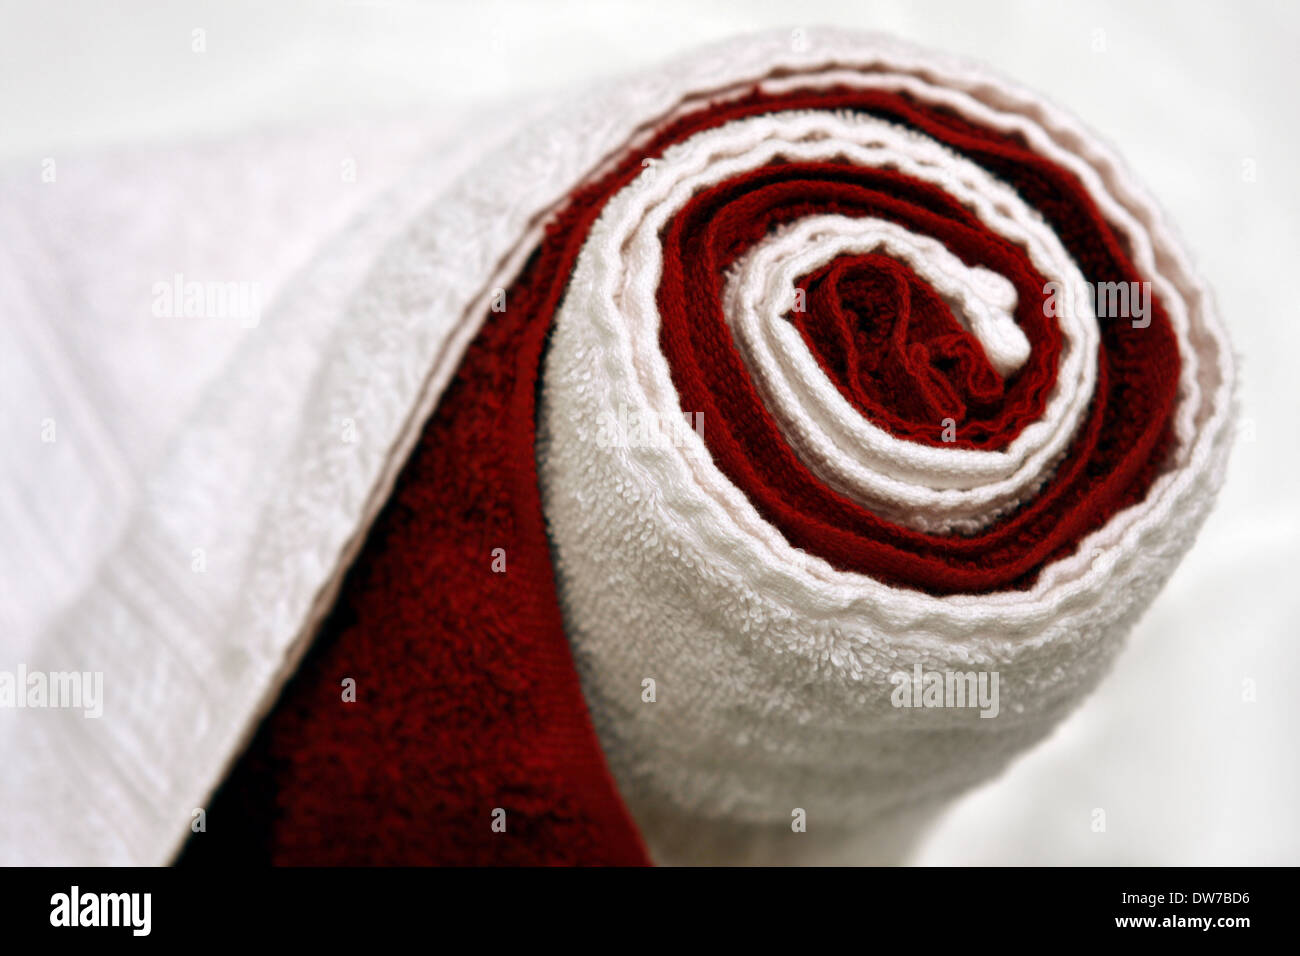 warm, dry, rolled up red and white towels in a spa Stock Photo